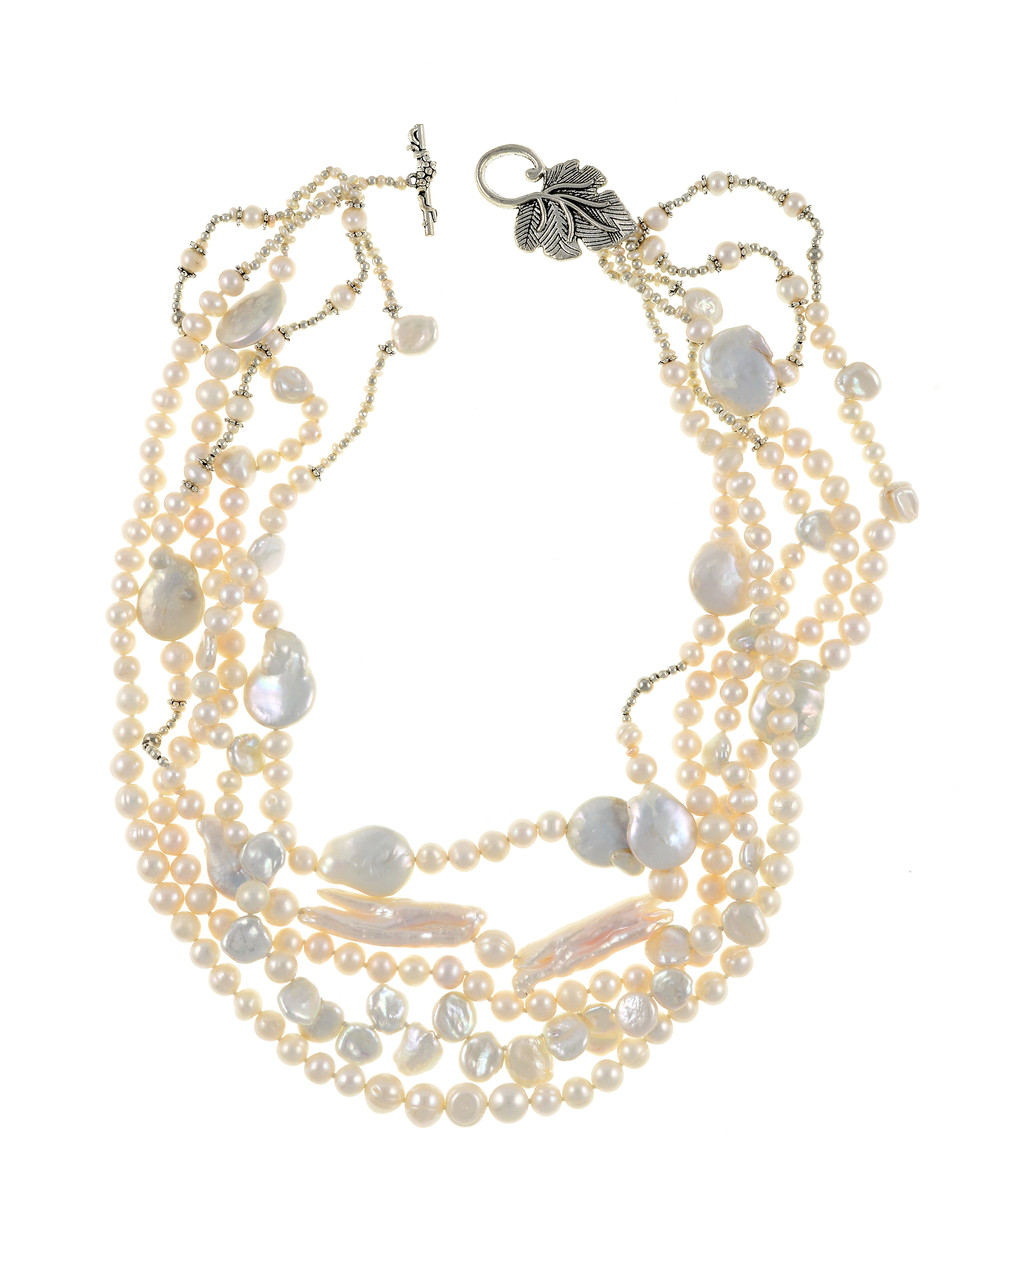 PEARL Necklace, 5 Strands of PEARLS make 1 Striking Façade